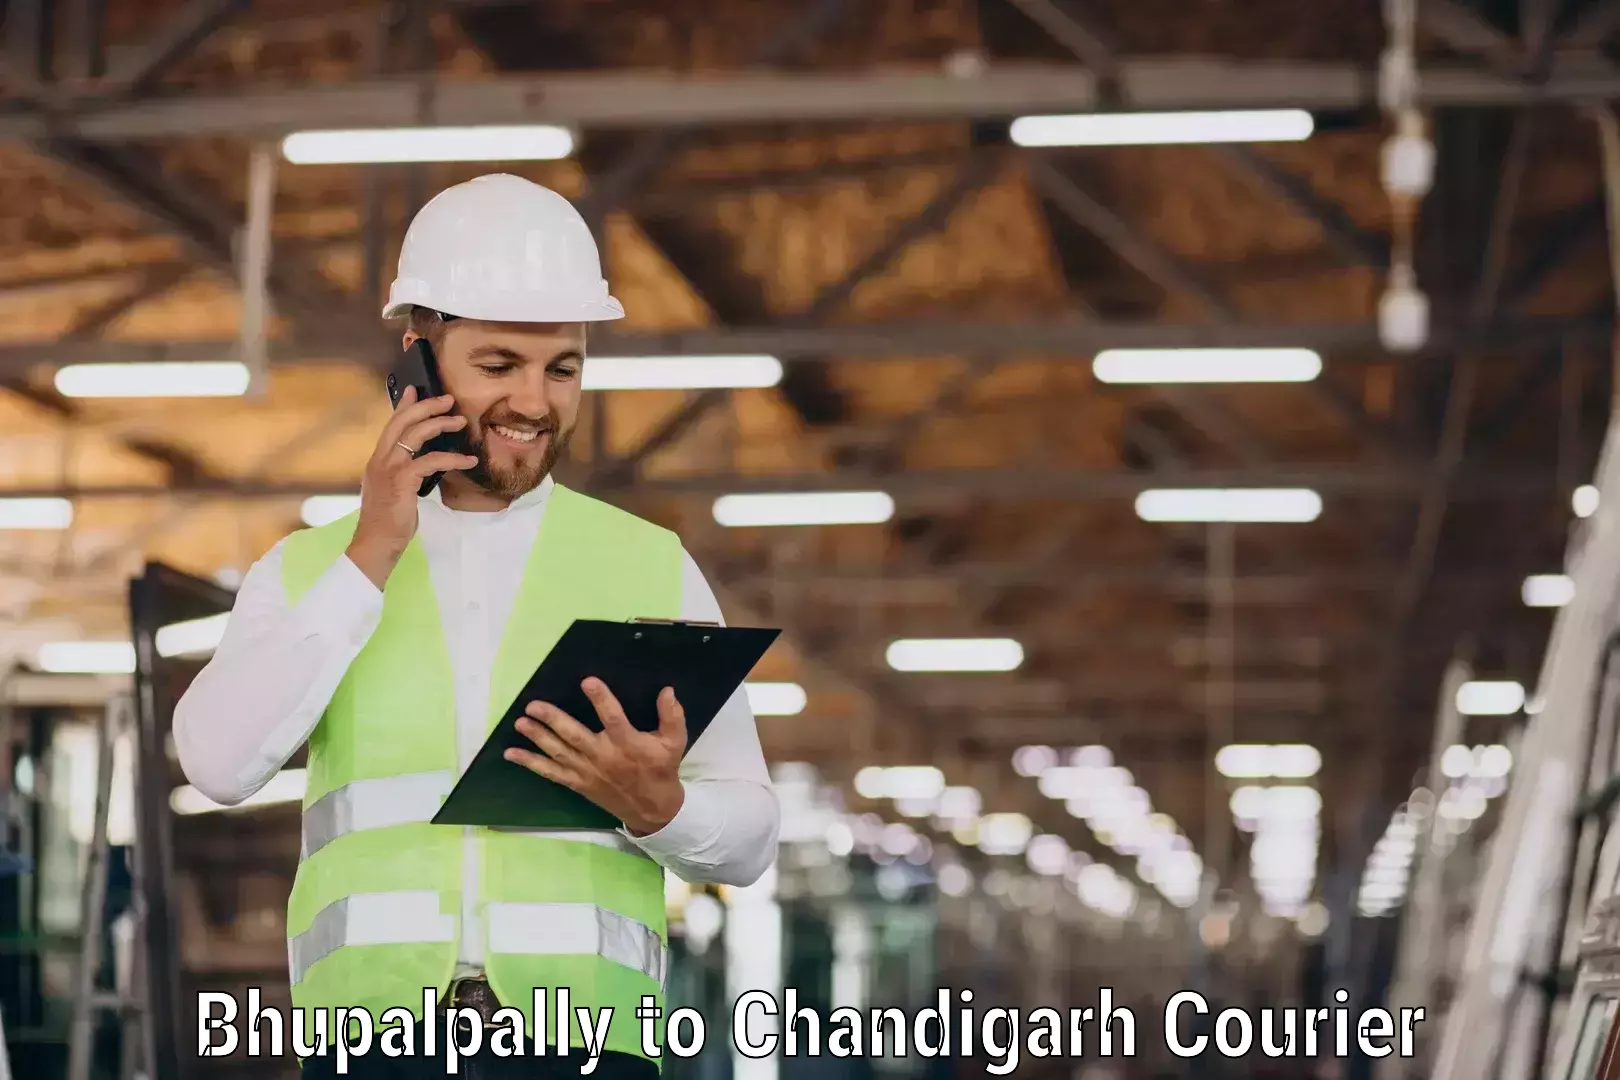 Fast delivery service Bhupalpally to Chandigarh